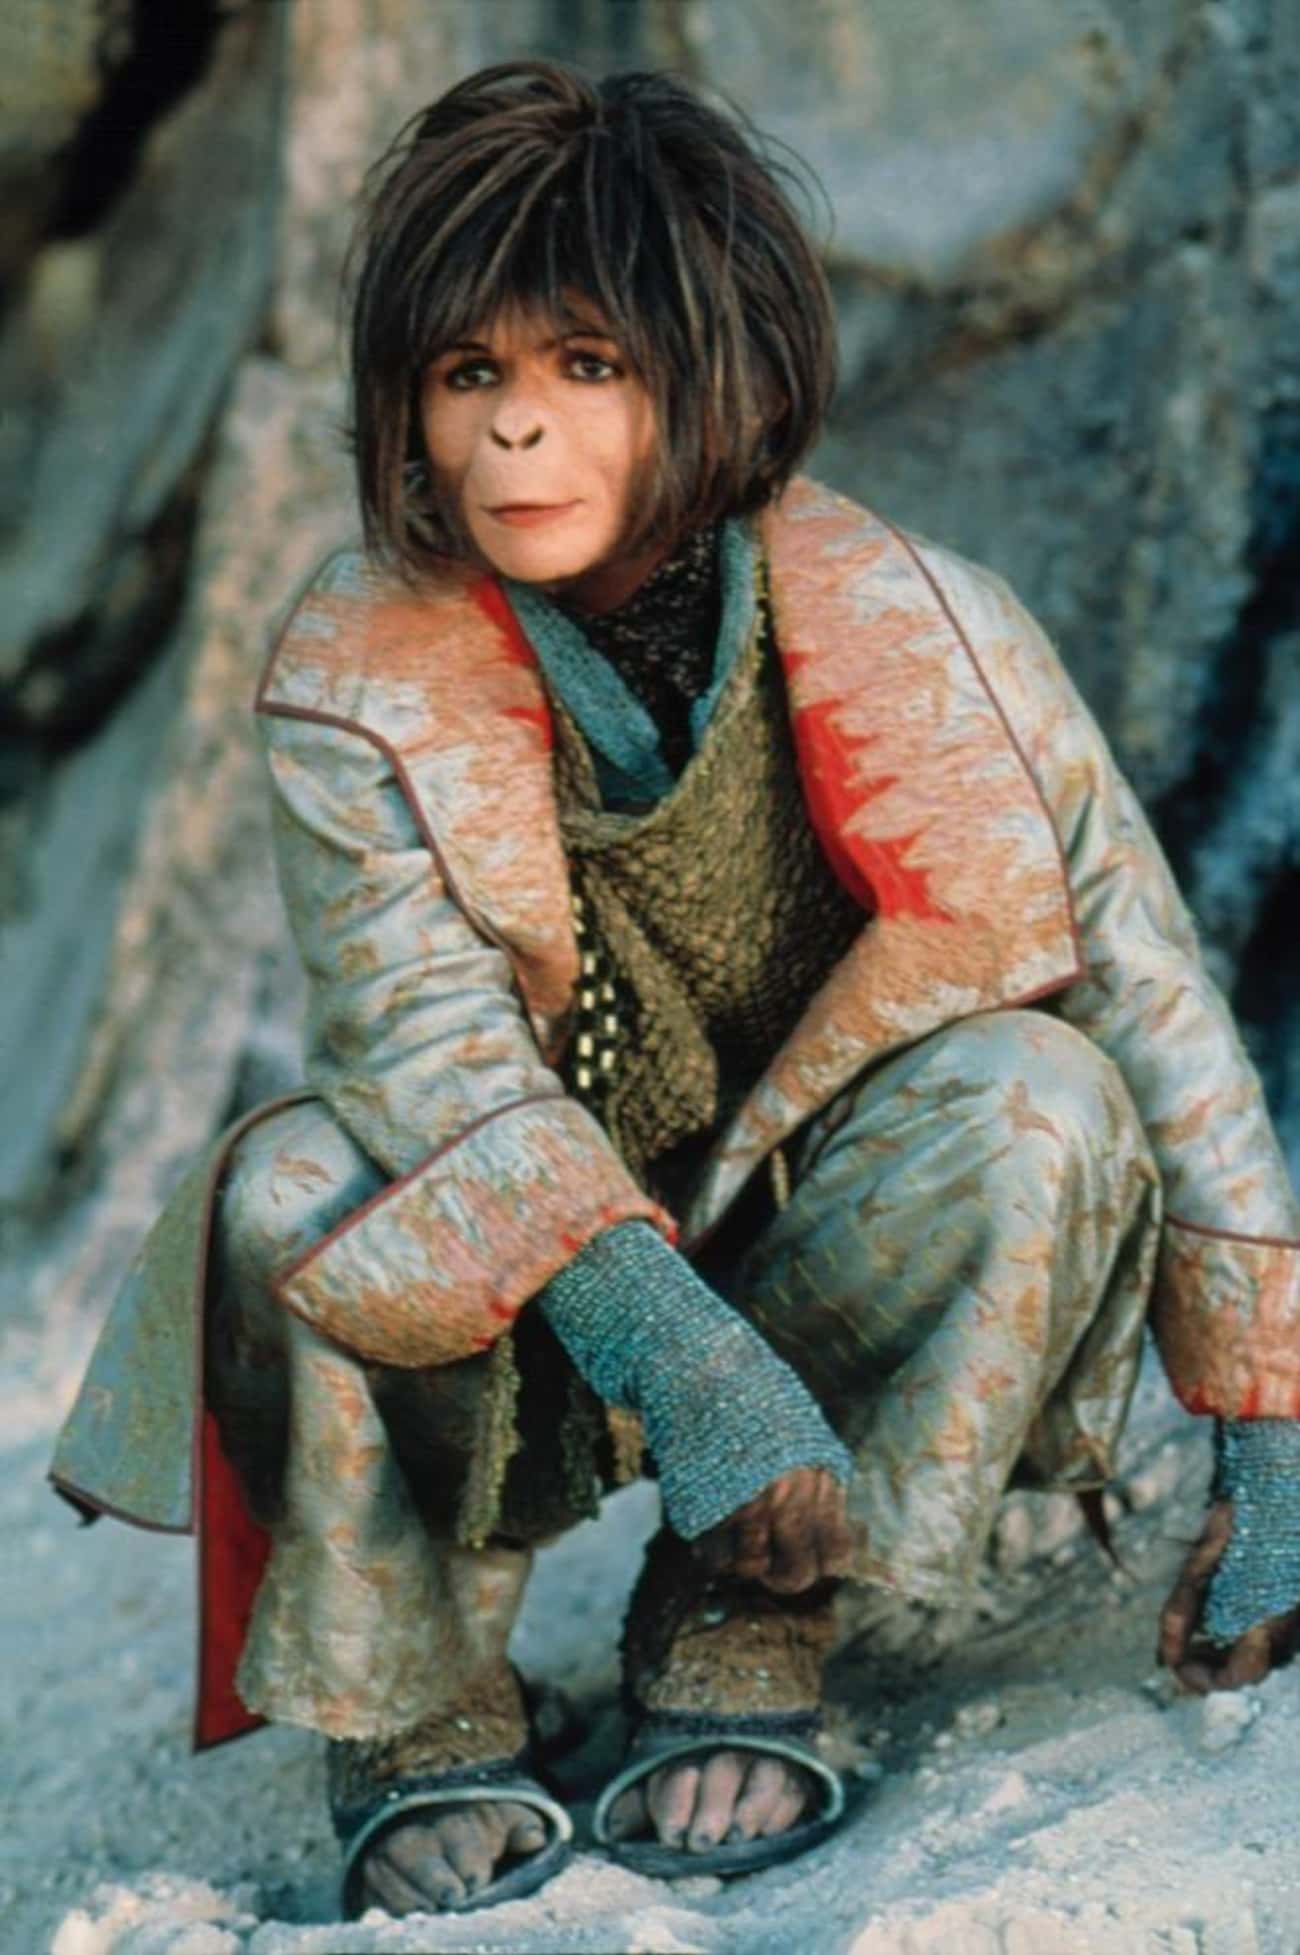 She Went To Ape School For 'Planet Of The Apes'